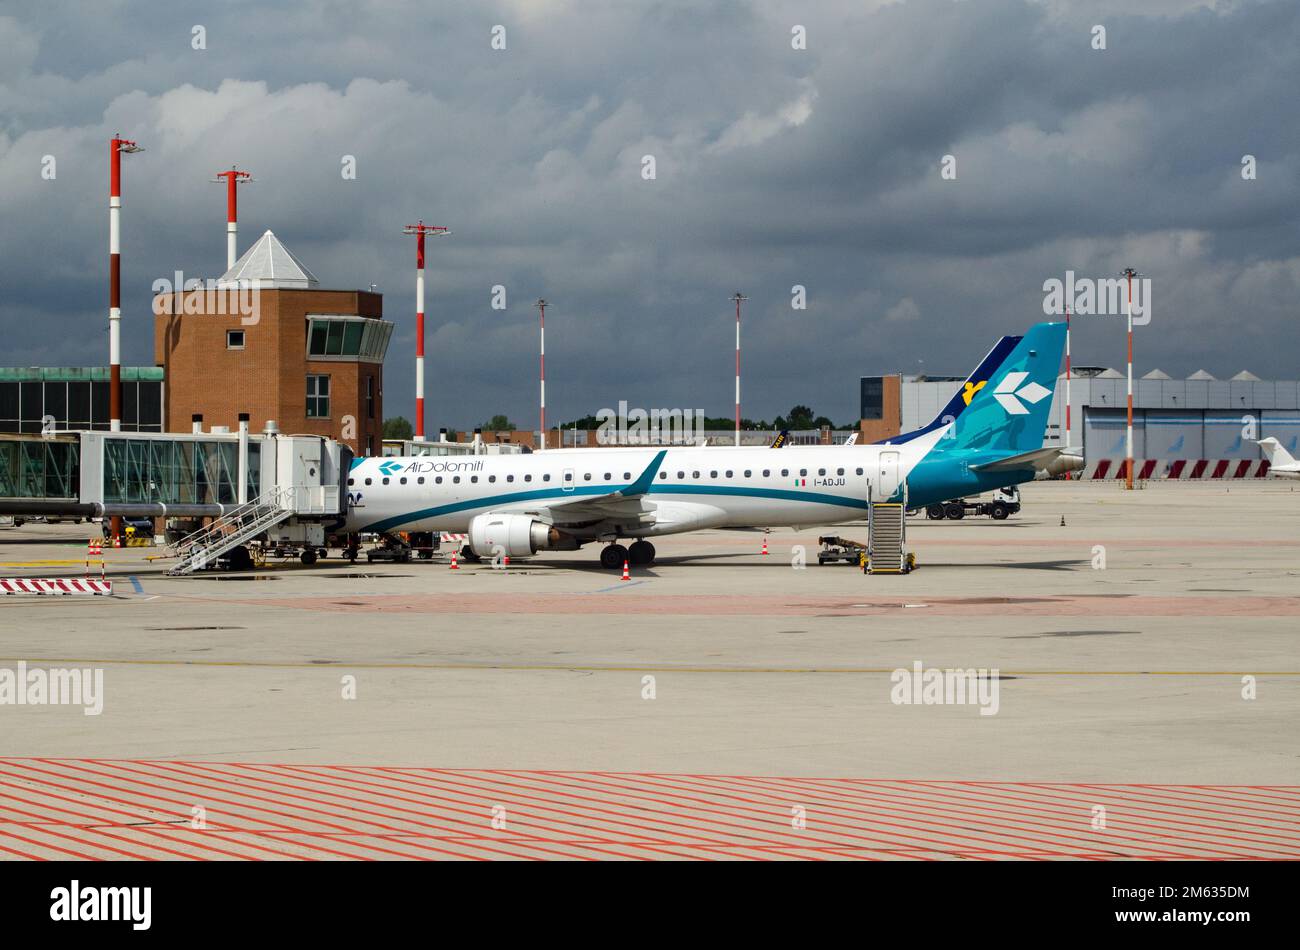 Venice, Italy - April 19, 2022: Embraer E195LR aircraft belonging to the Air Dolomiti regional airline at an airbridge at Marco Polo Airport in Venice Stock Photo